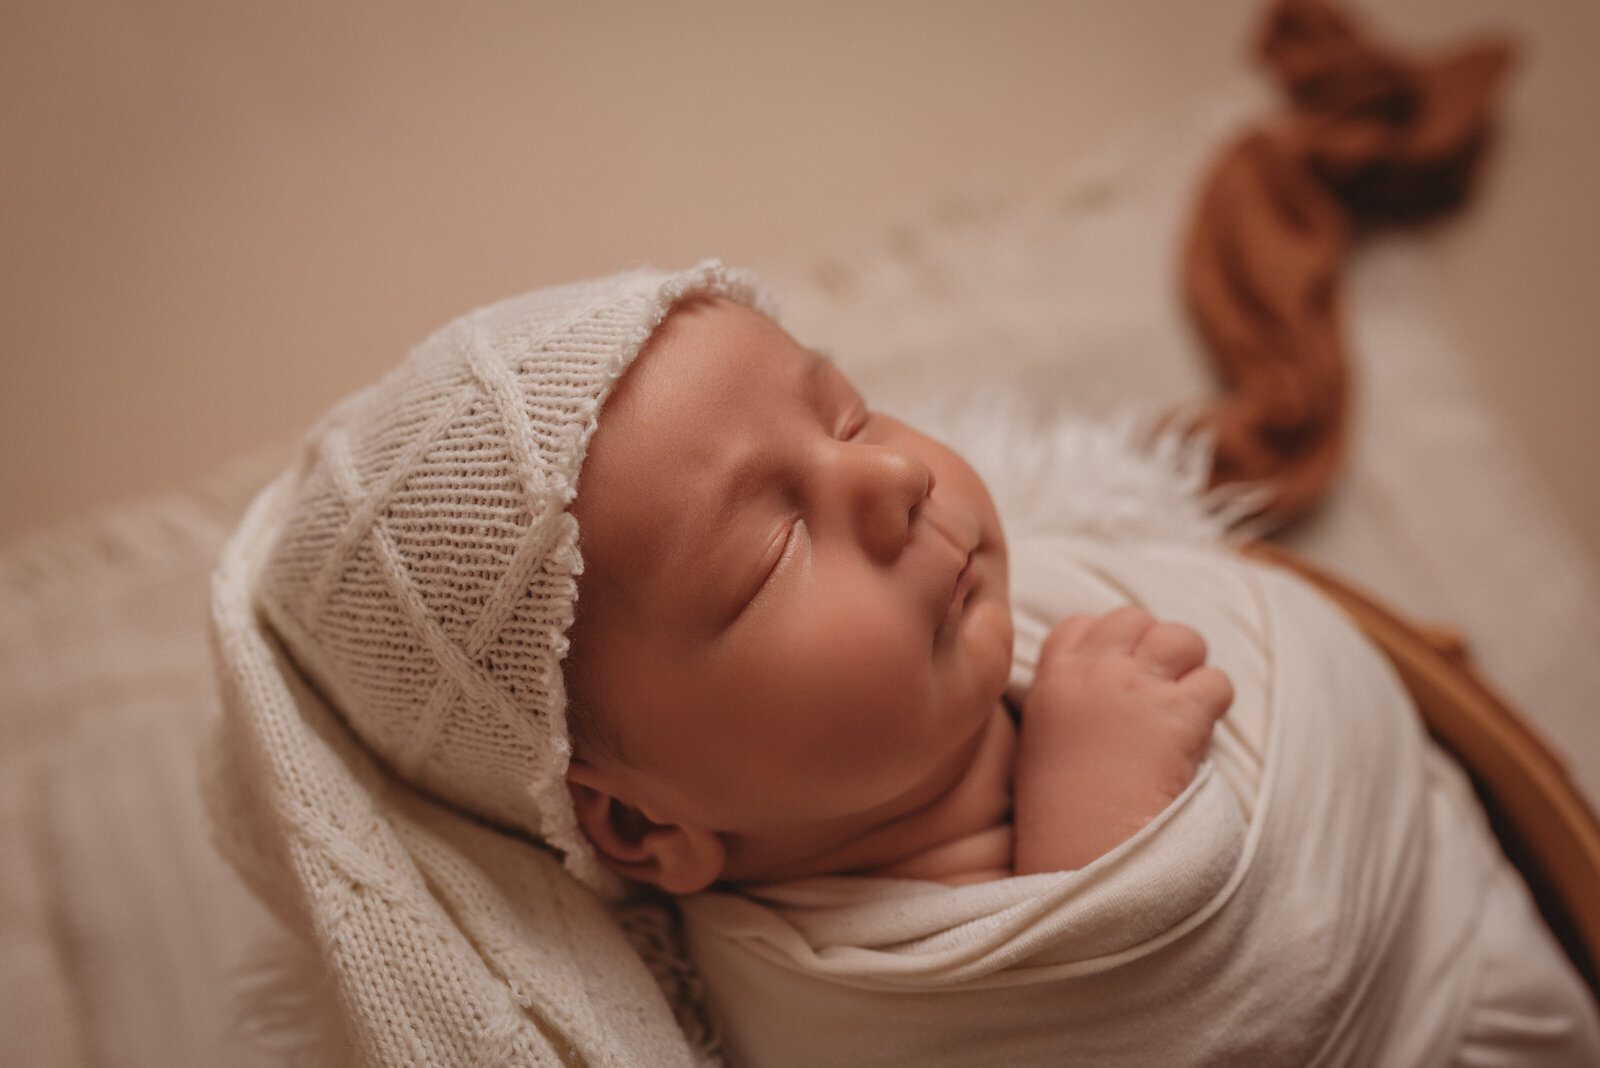 Newborn boy at his newborn portrait session wearing a white hat and white swaddle